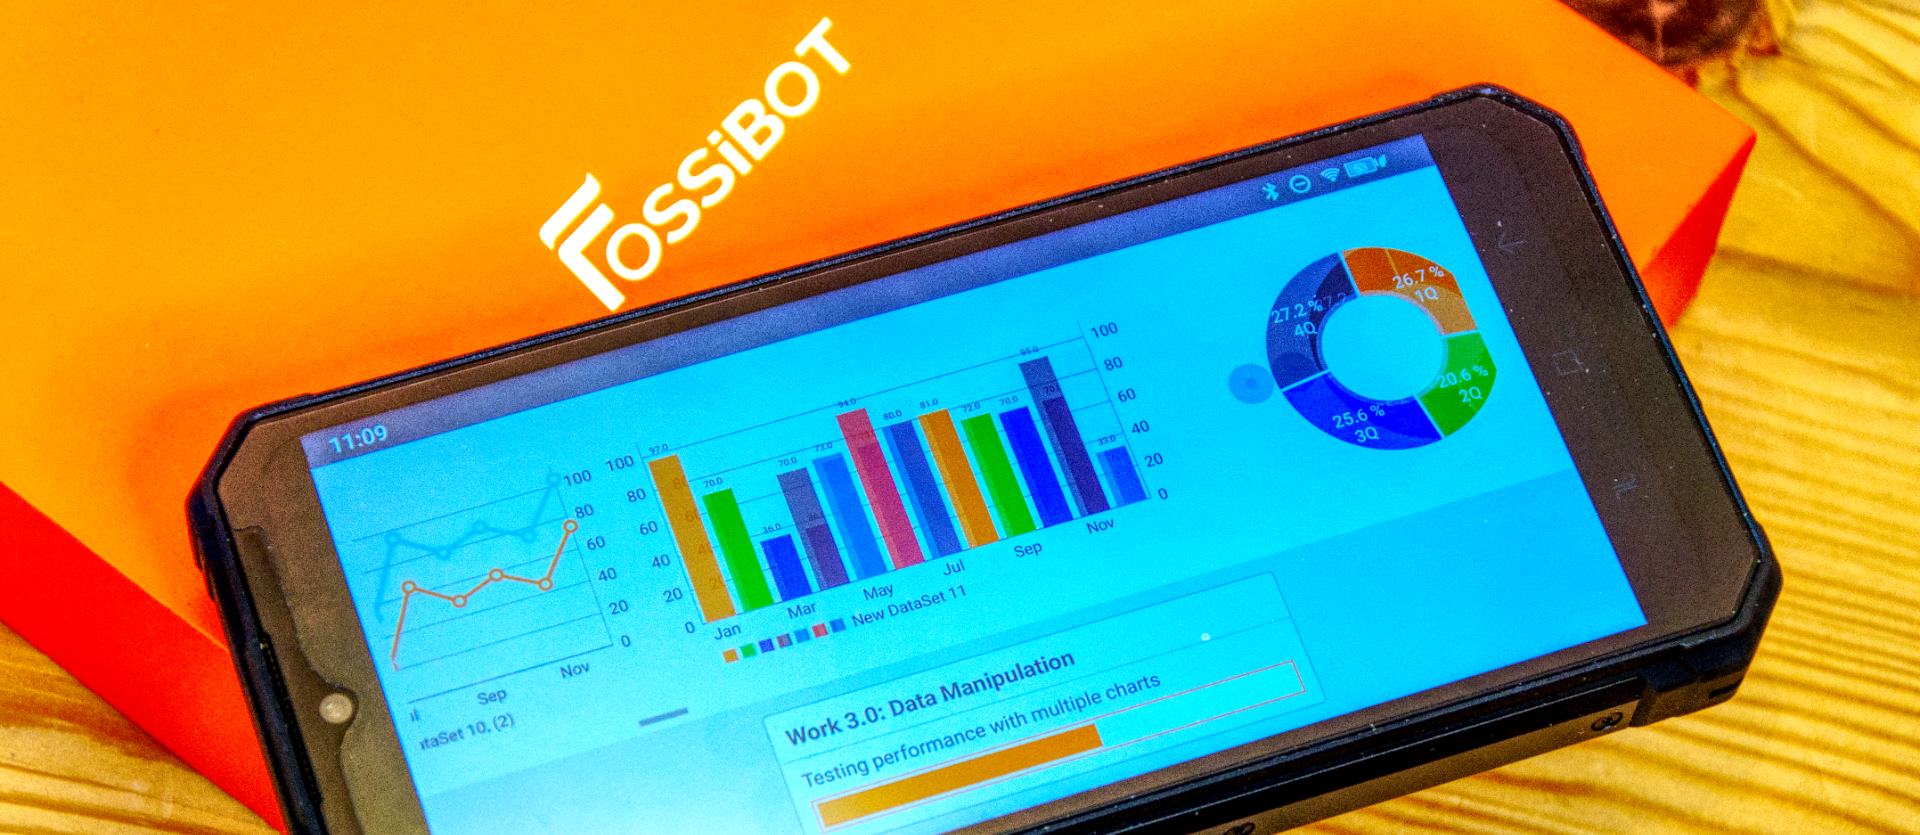 FOSSiBOT F102 PREVIEW: Is This The Best Smartphone For Hiking? 